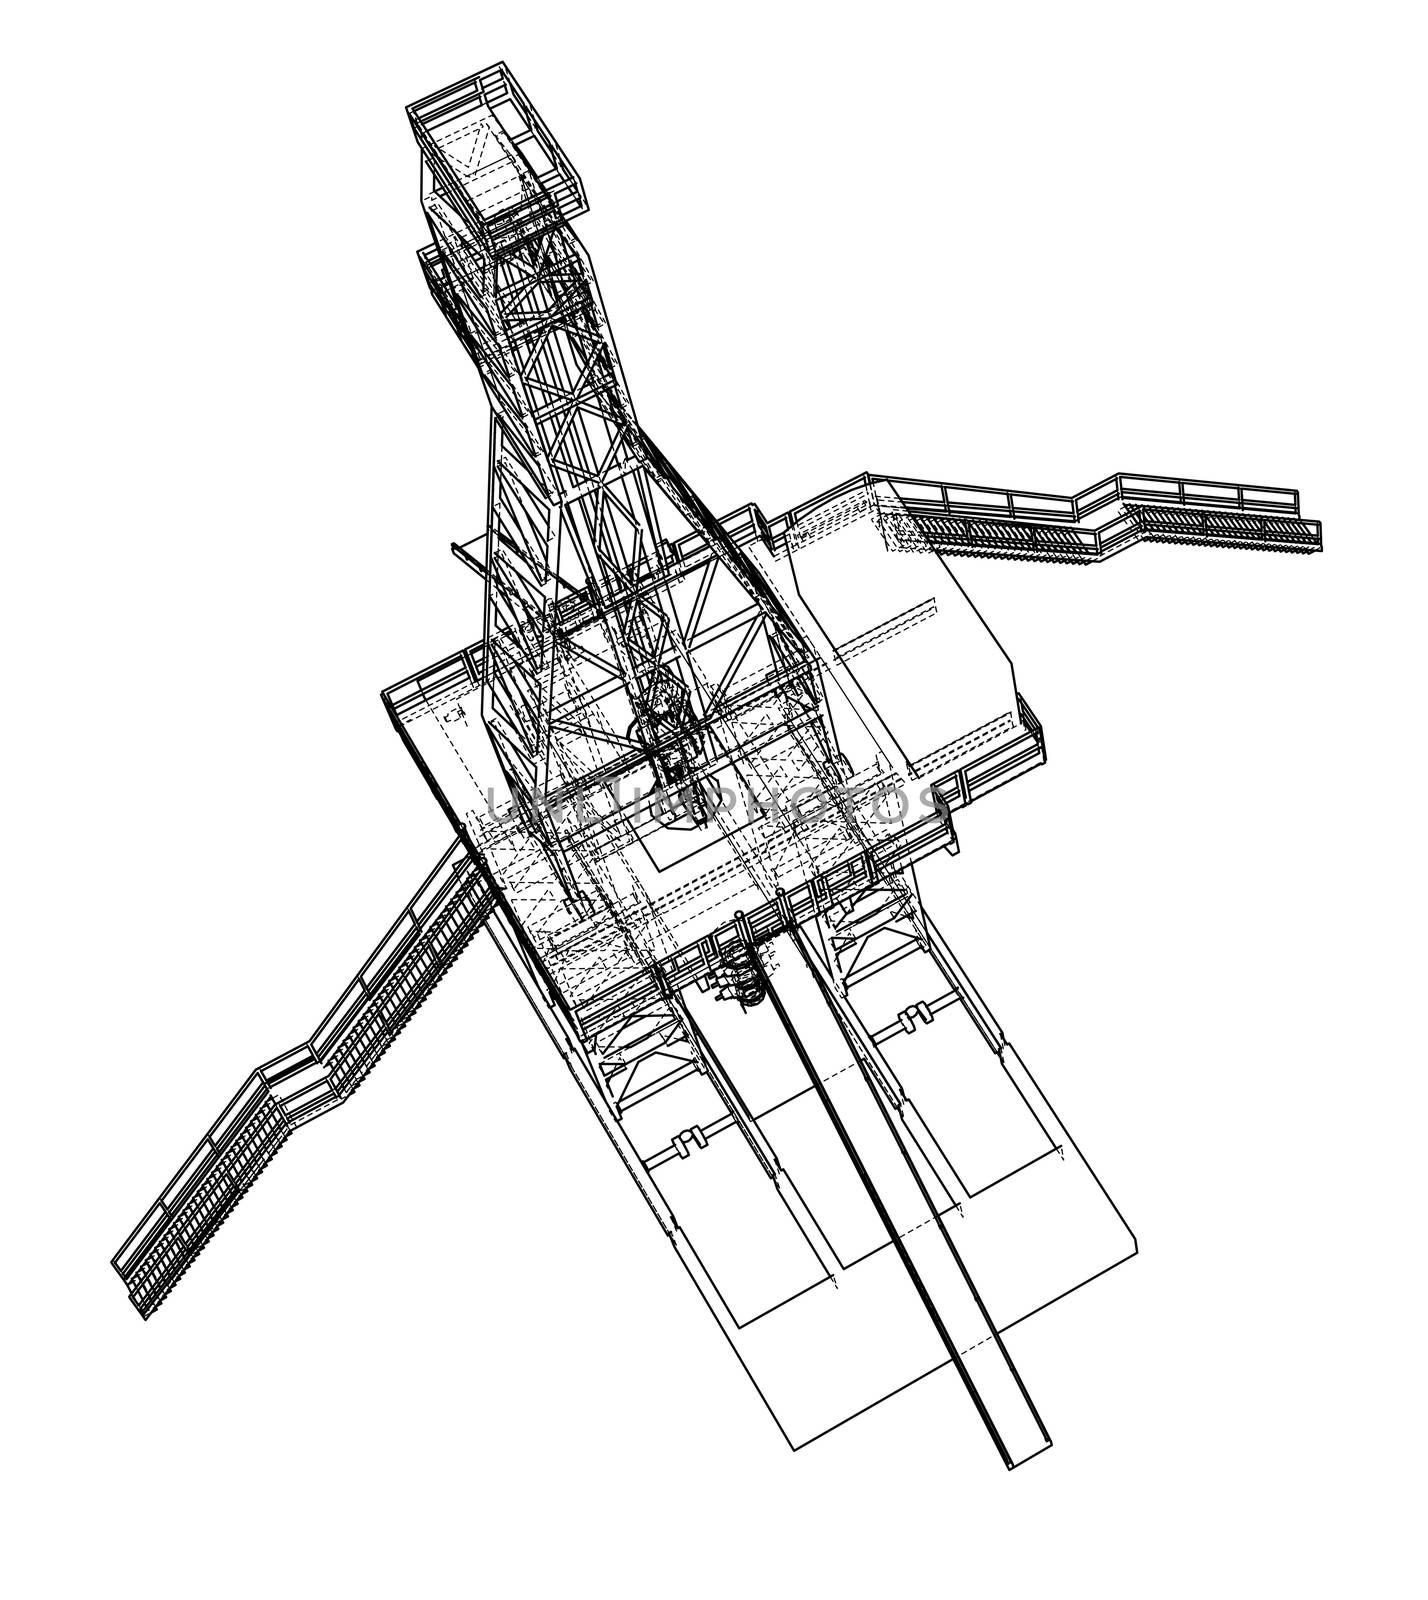 Oil rig concept. 3d illustration. Wire-frame style